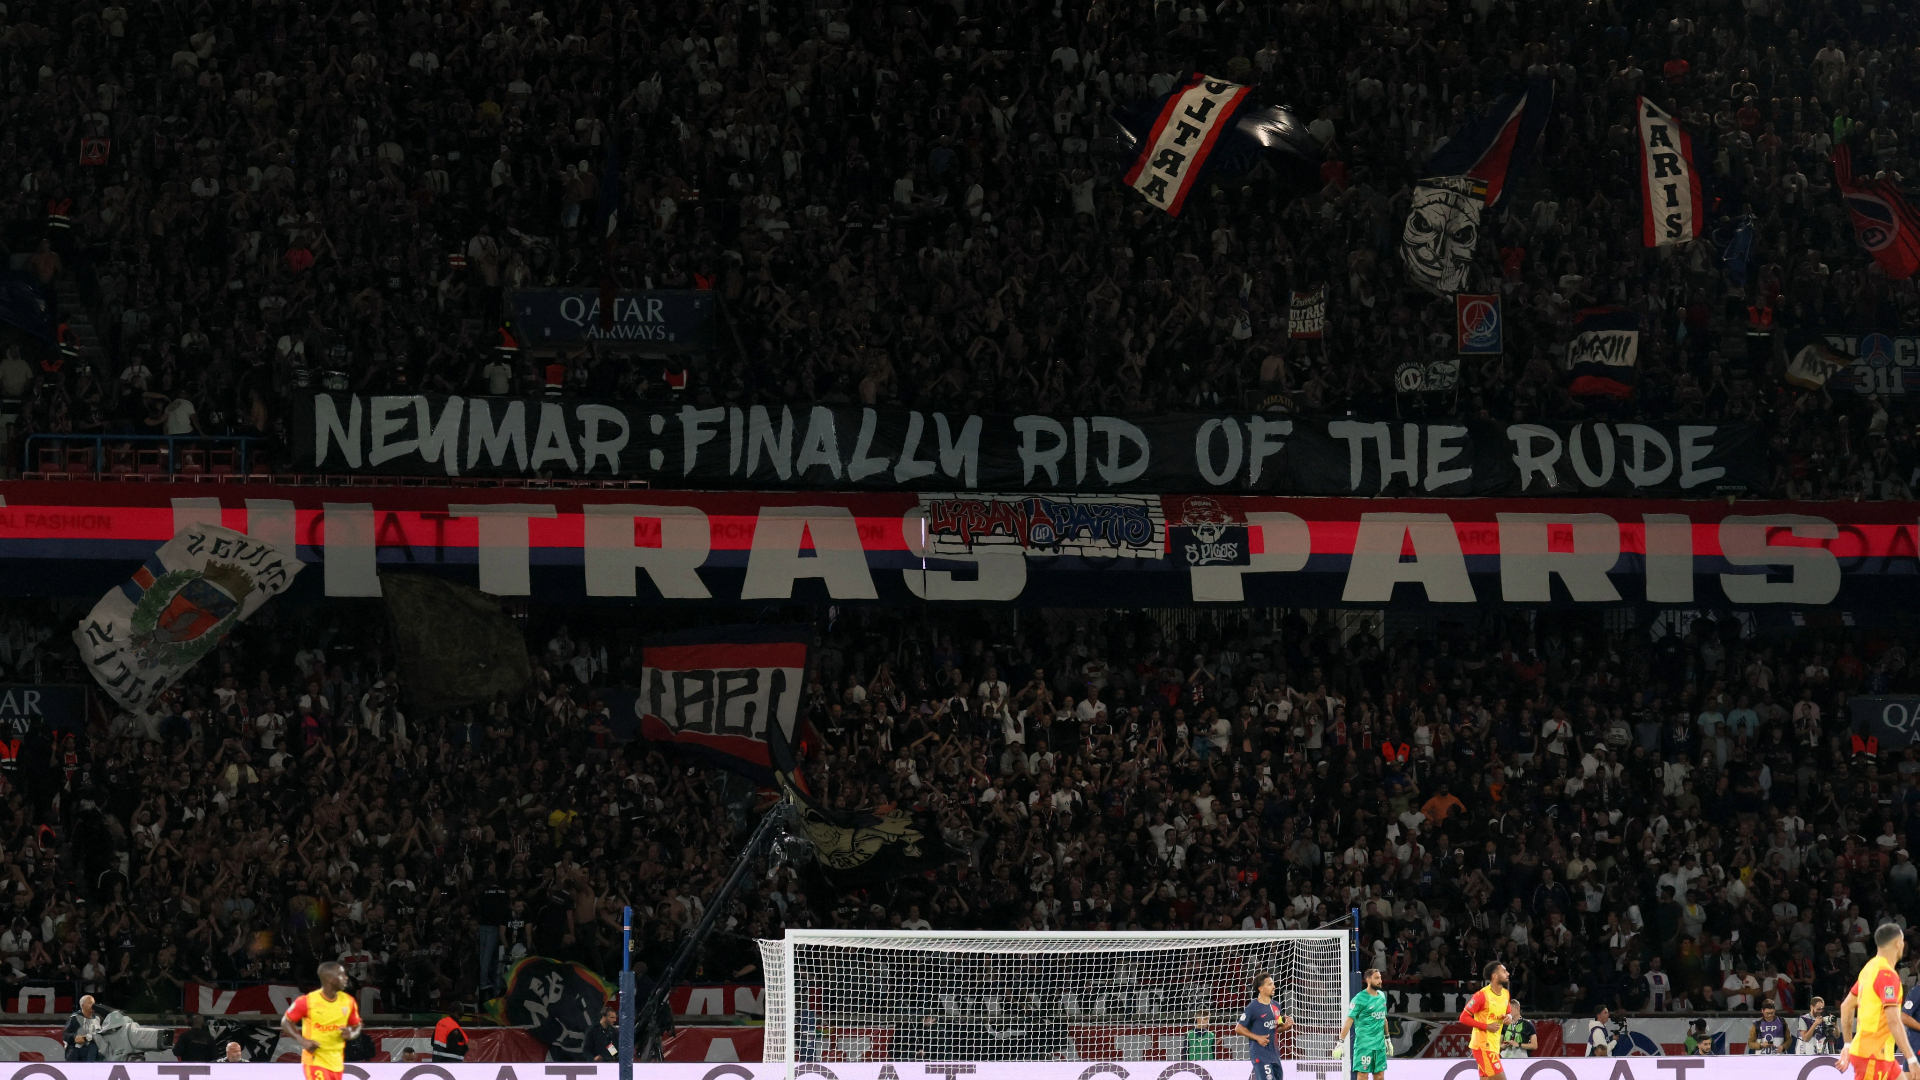 PSG Supporters Take Shots at Neymar, Messi: 'Finally Rid of the Rude'